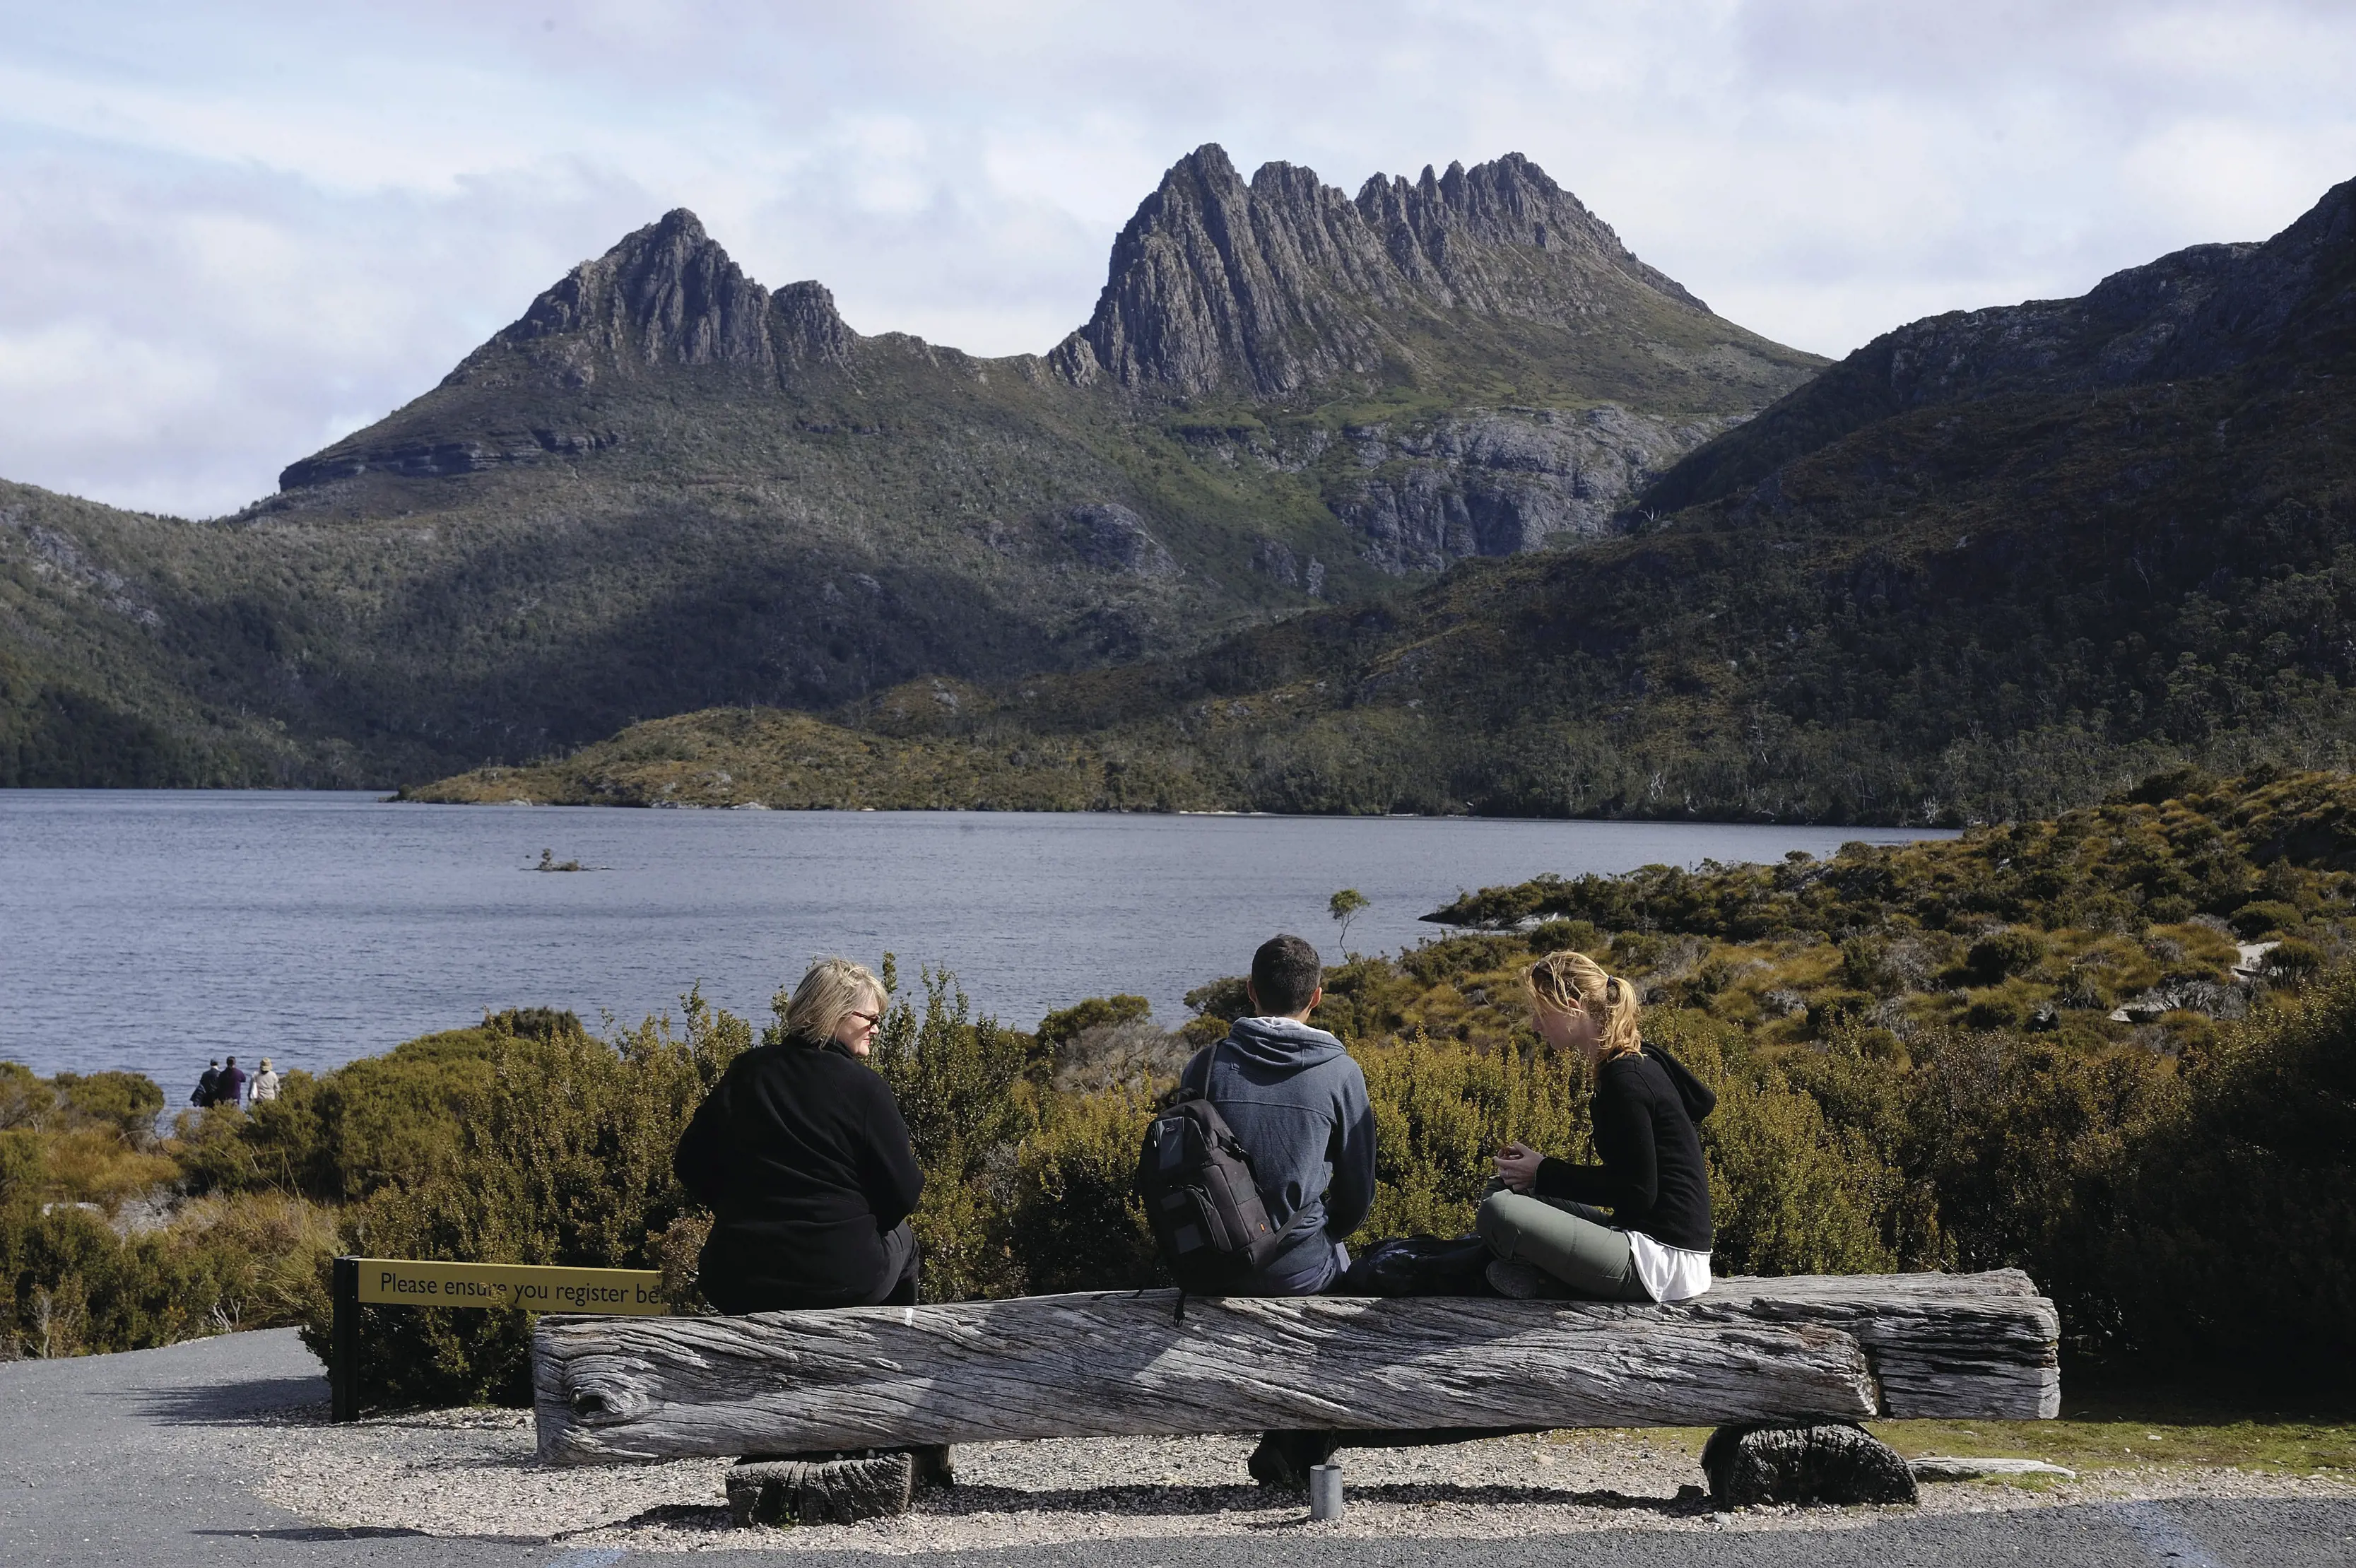 "Three people sitting by Dove Lake, looking at the stunning landscape that leads to Cradle Mountain in the background. "